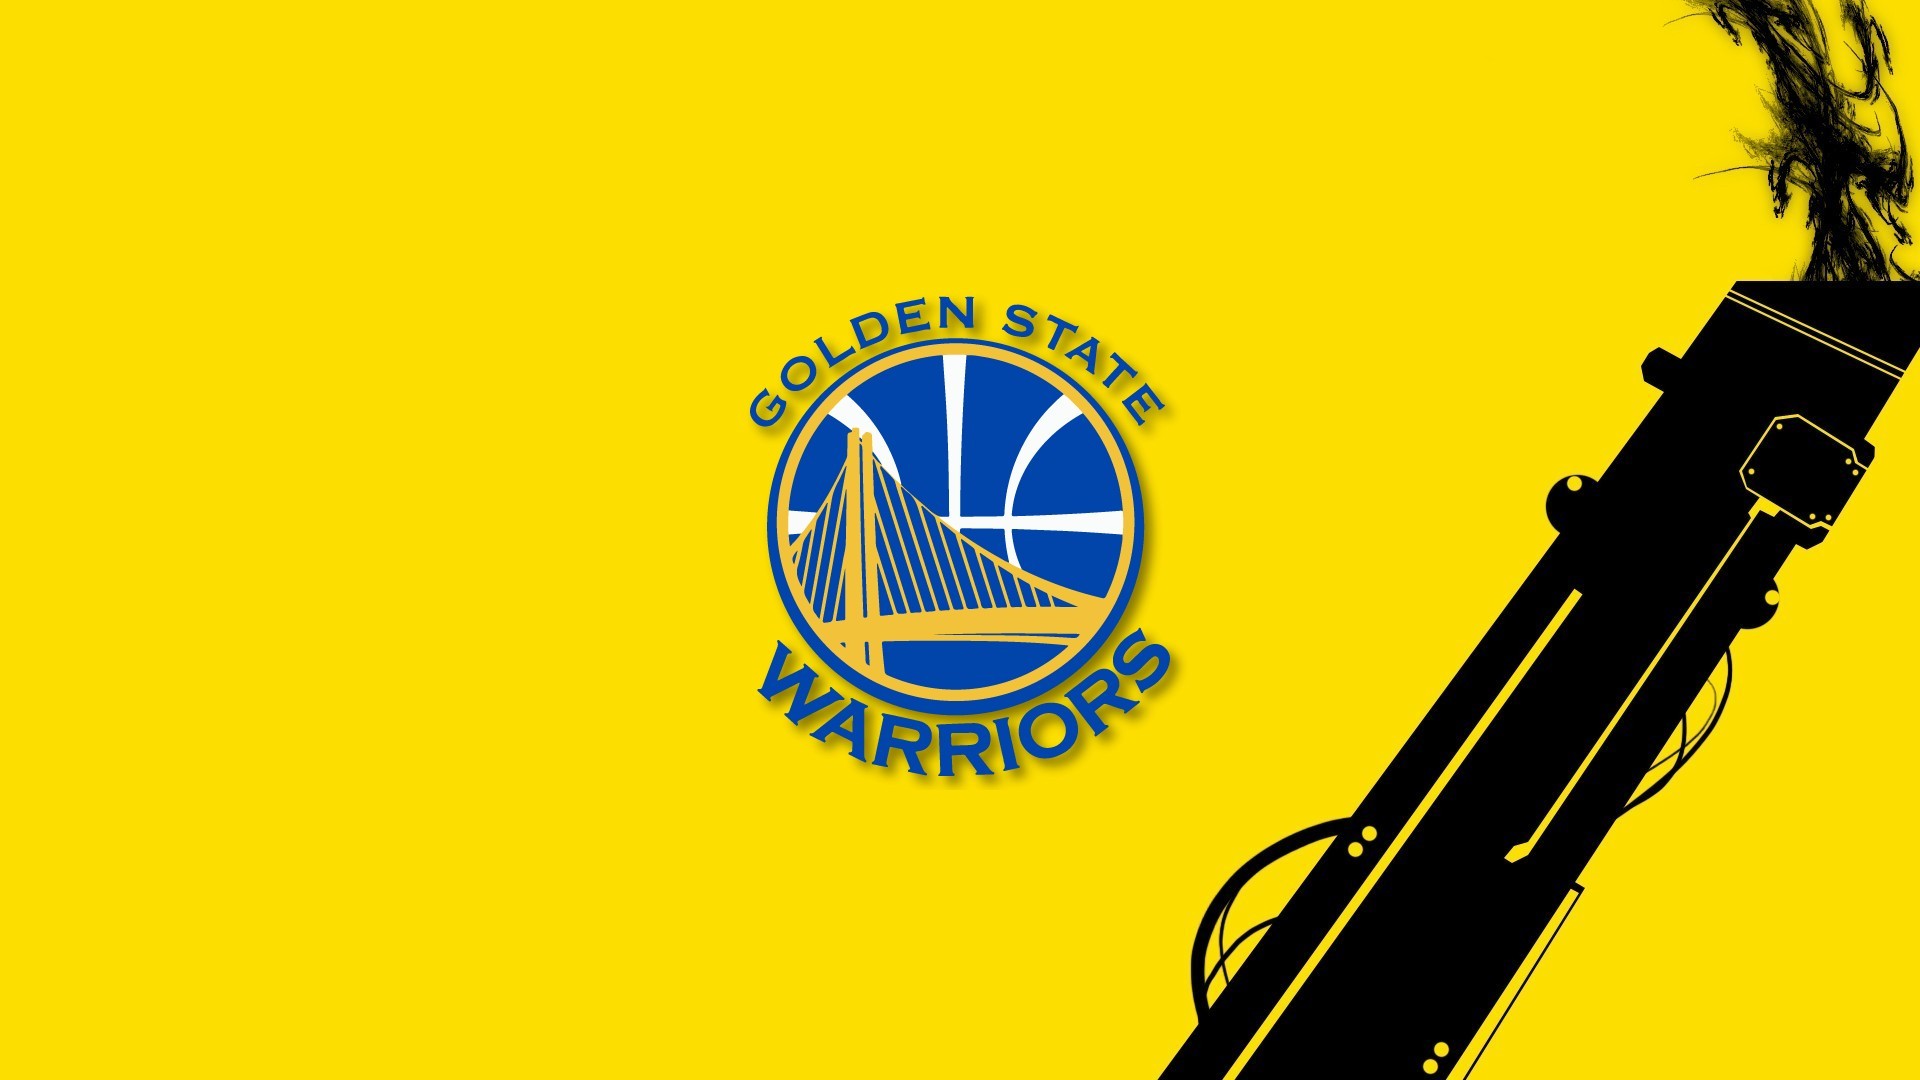 1920x1080 Cool Golden State Warriors Wallpaper HD with image resolution   pixel. You can make this